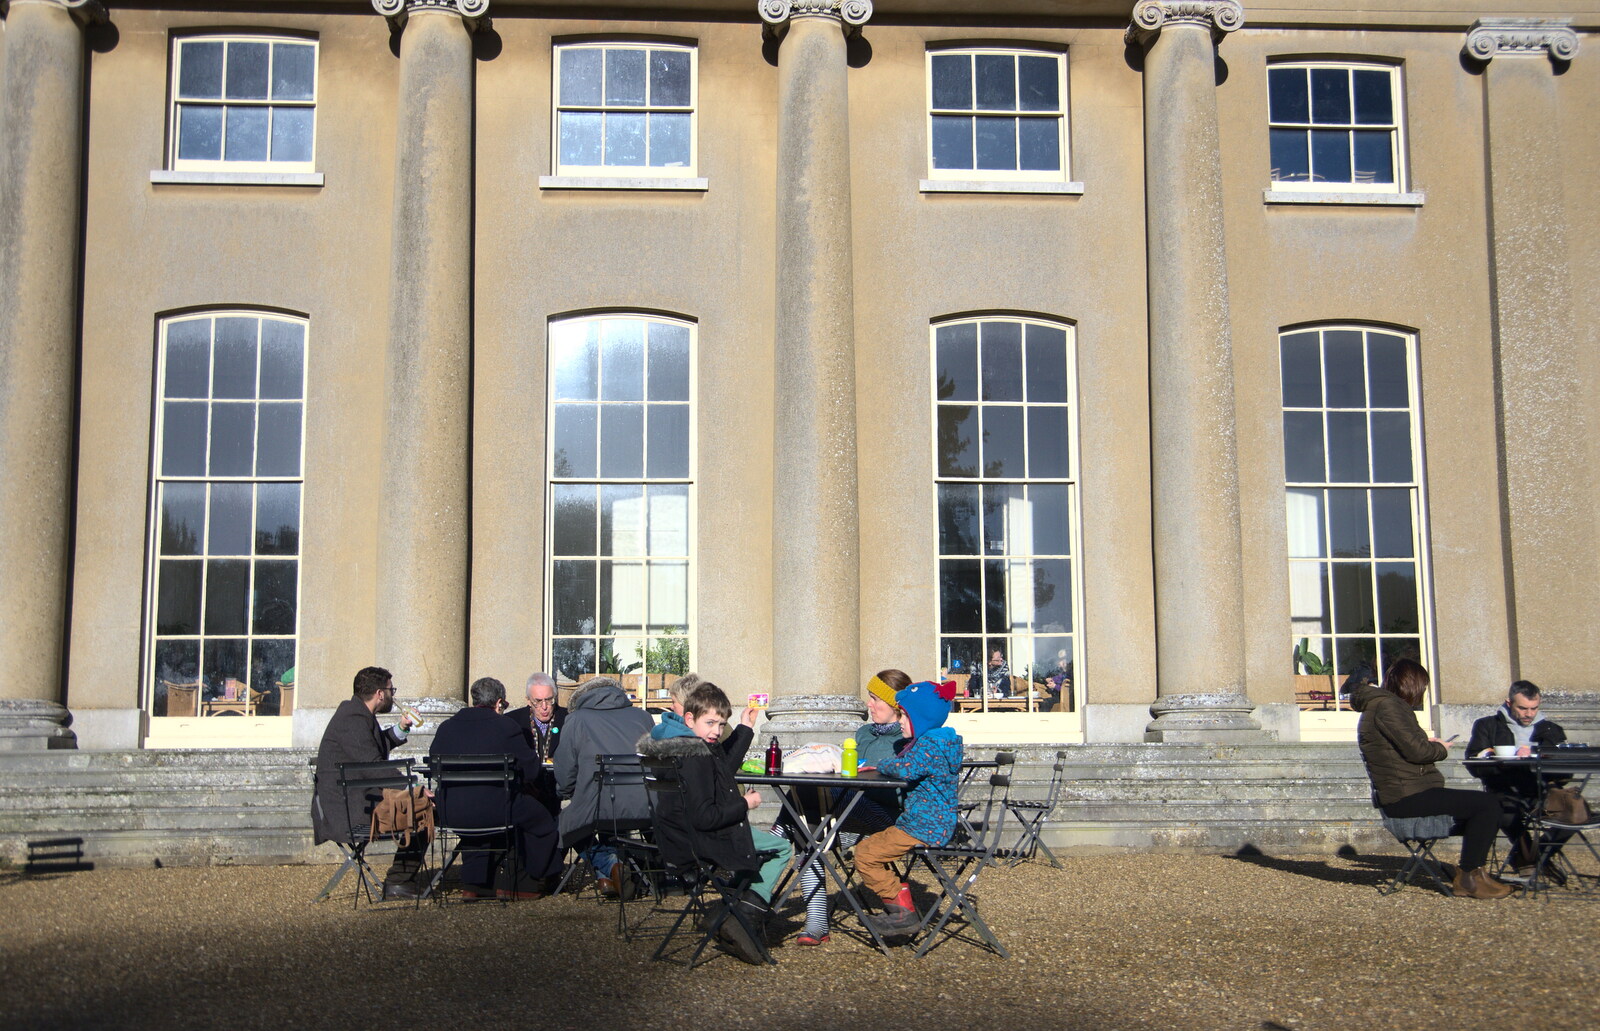 A bite to eat outside the orangery from Life Below Stairs, Ickworth House, Horringer, Suffolk - 28th January 2018